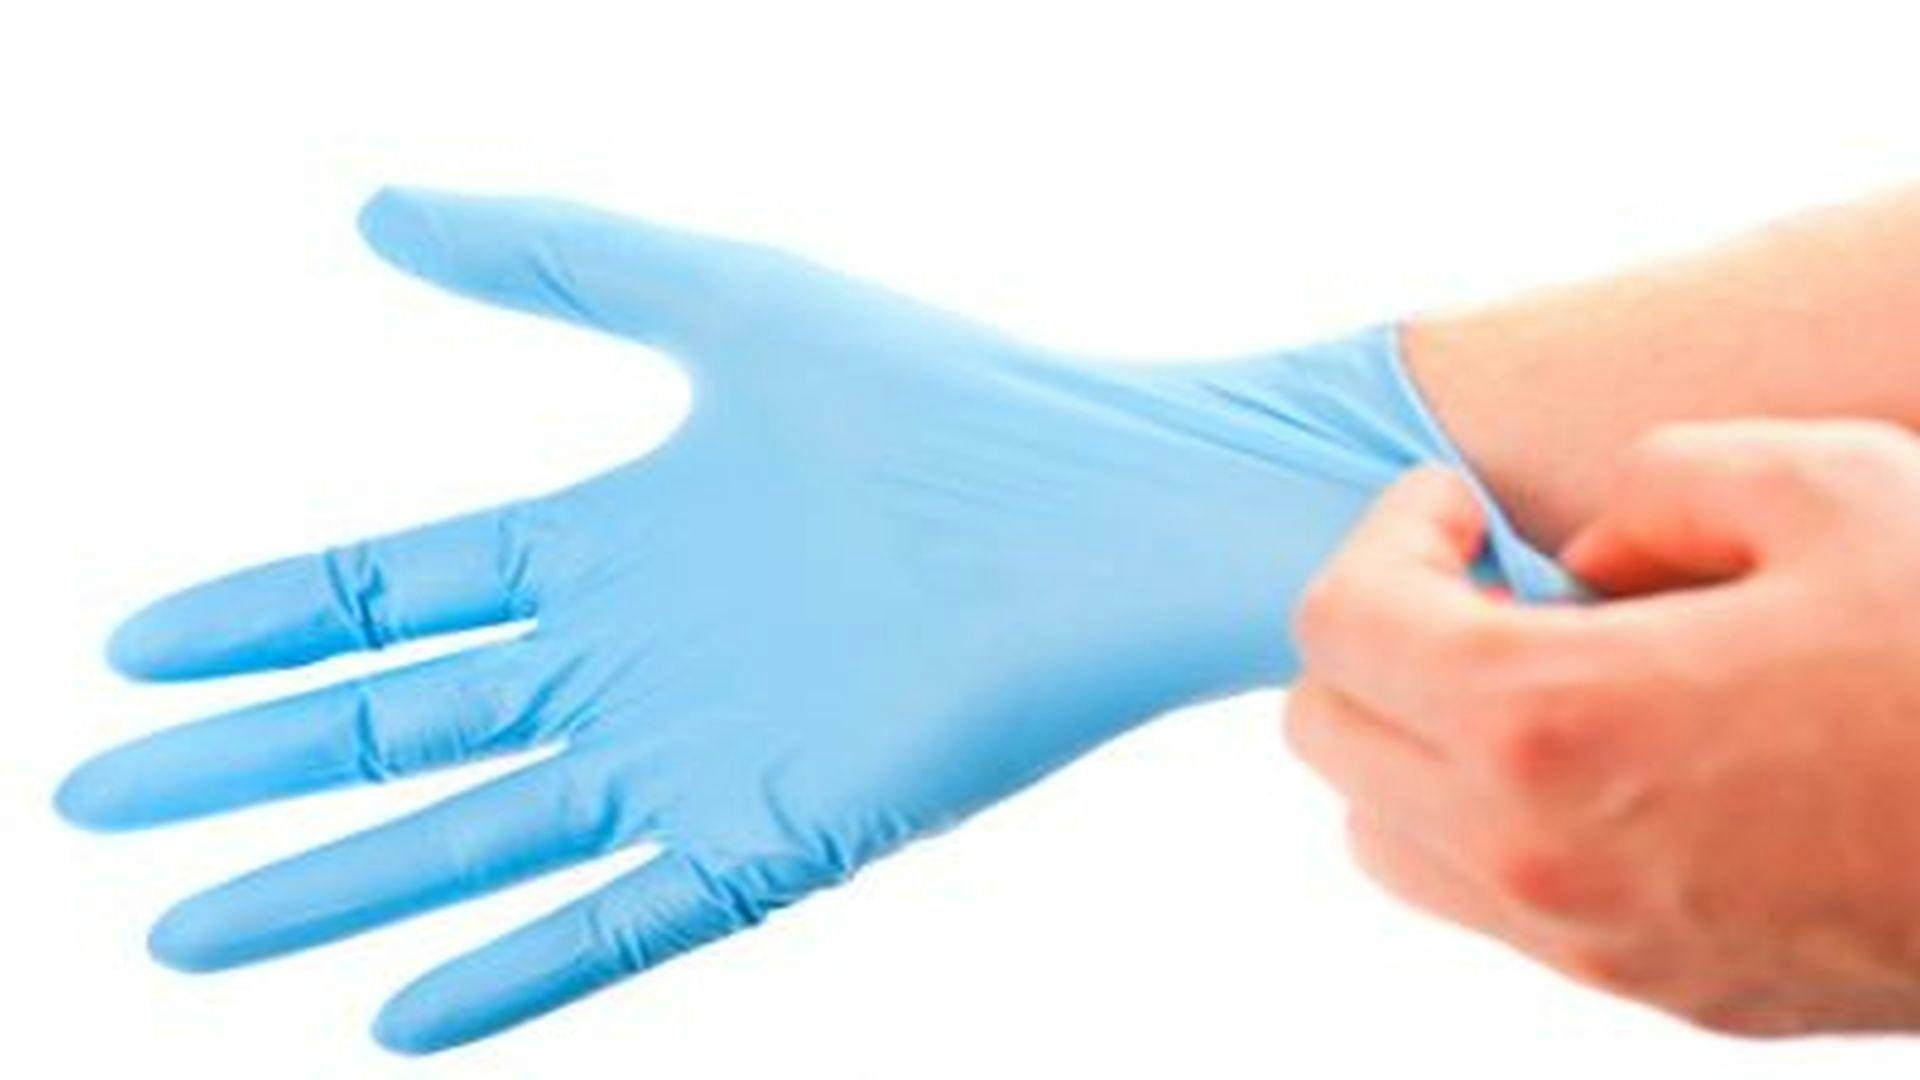 Nursing Home Workers Often Fail to Change Gloves